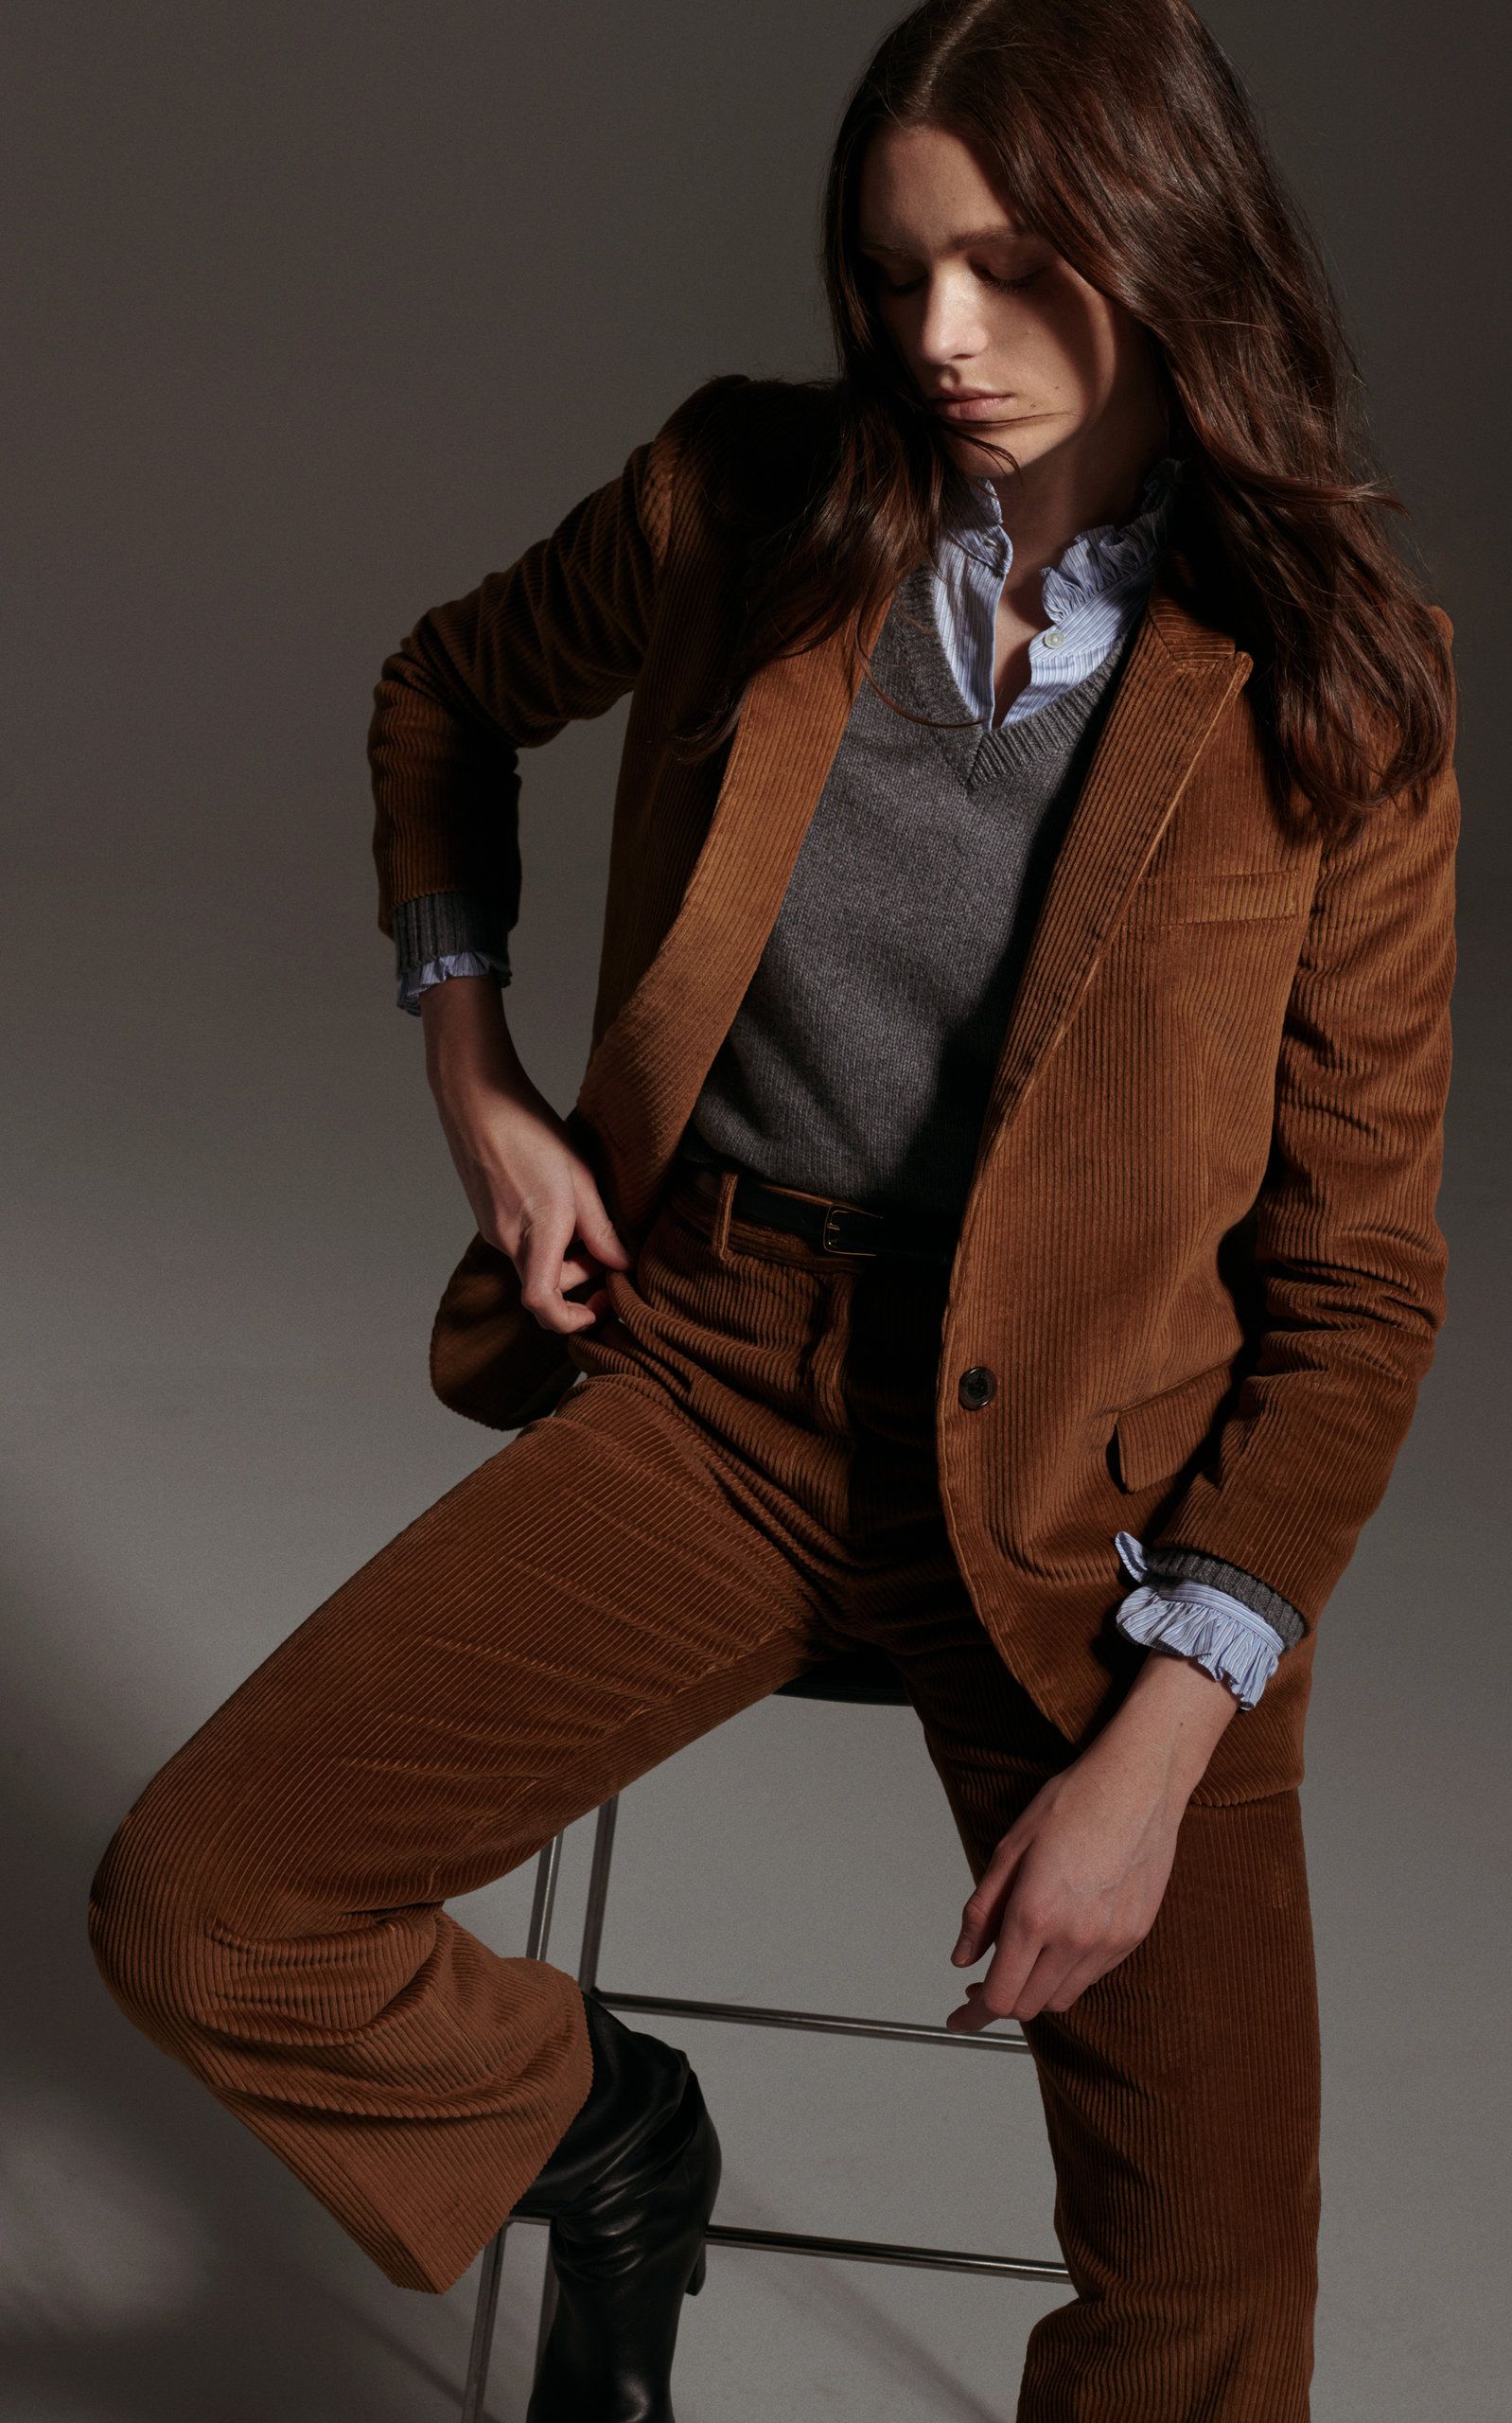 How to Style Corduroy Blazer: 15 Attractive Outfit Ideas for Ladies